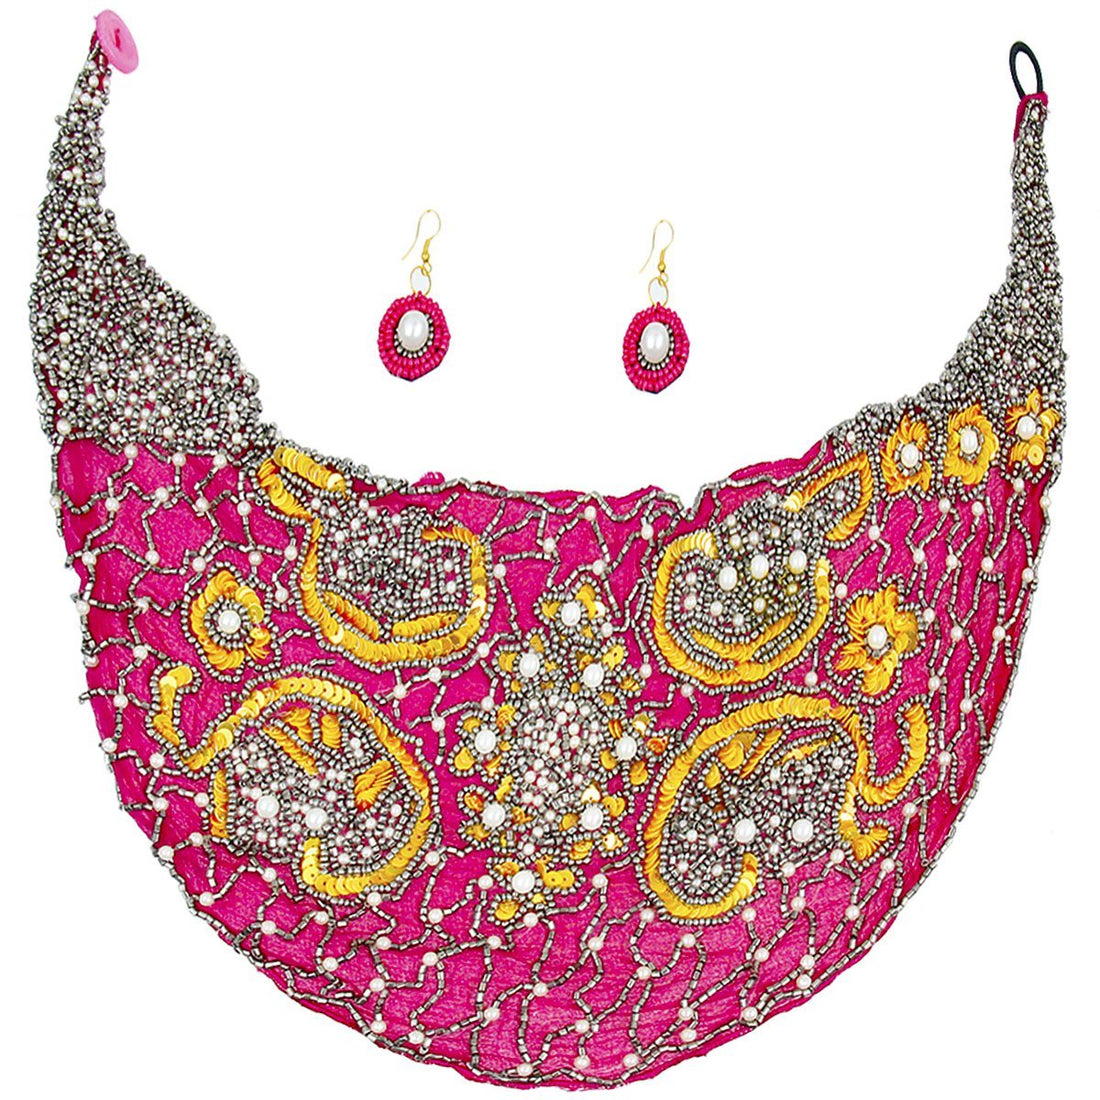 Handmade Fuchsia Chiffon Scarf Necklace Set . Embroidered Sequins Beads and Pearls